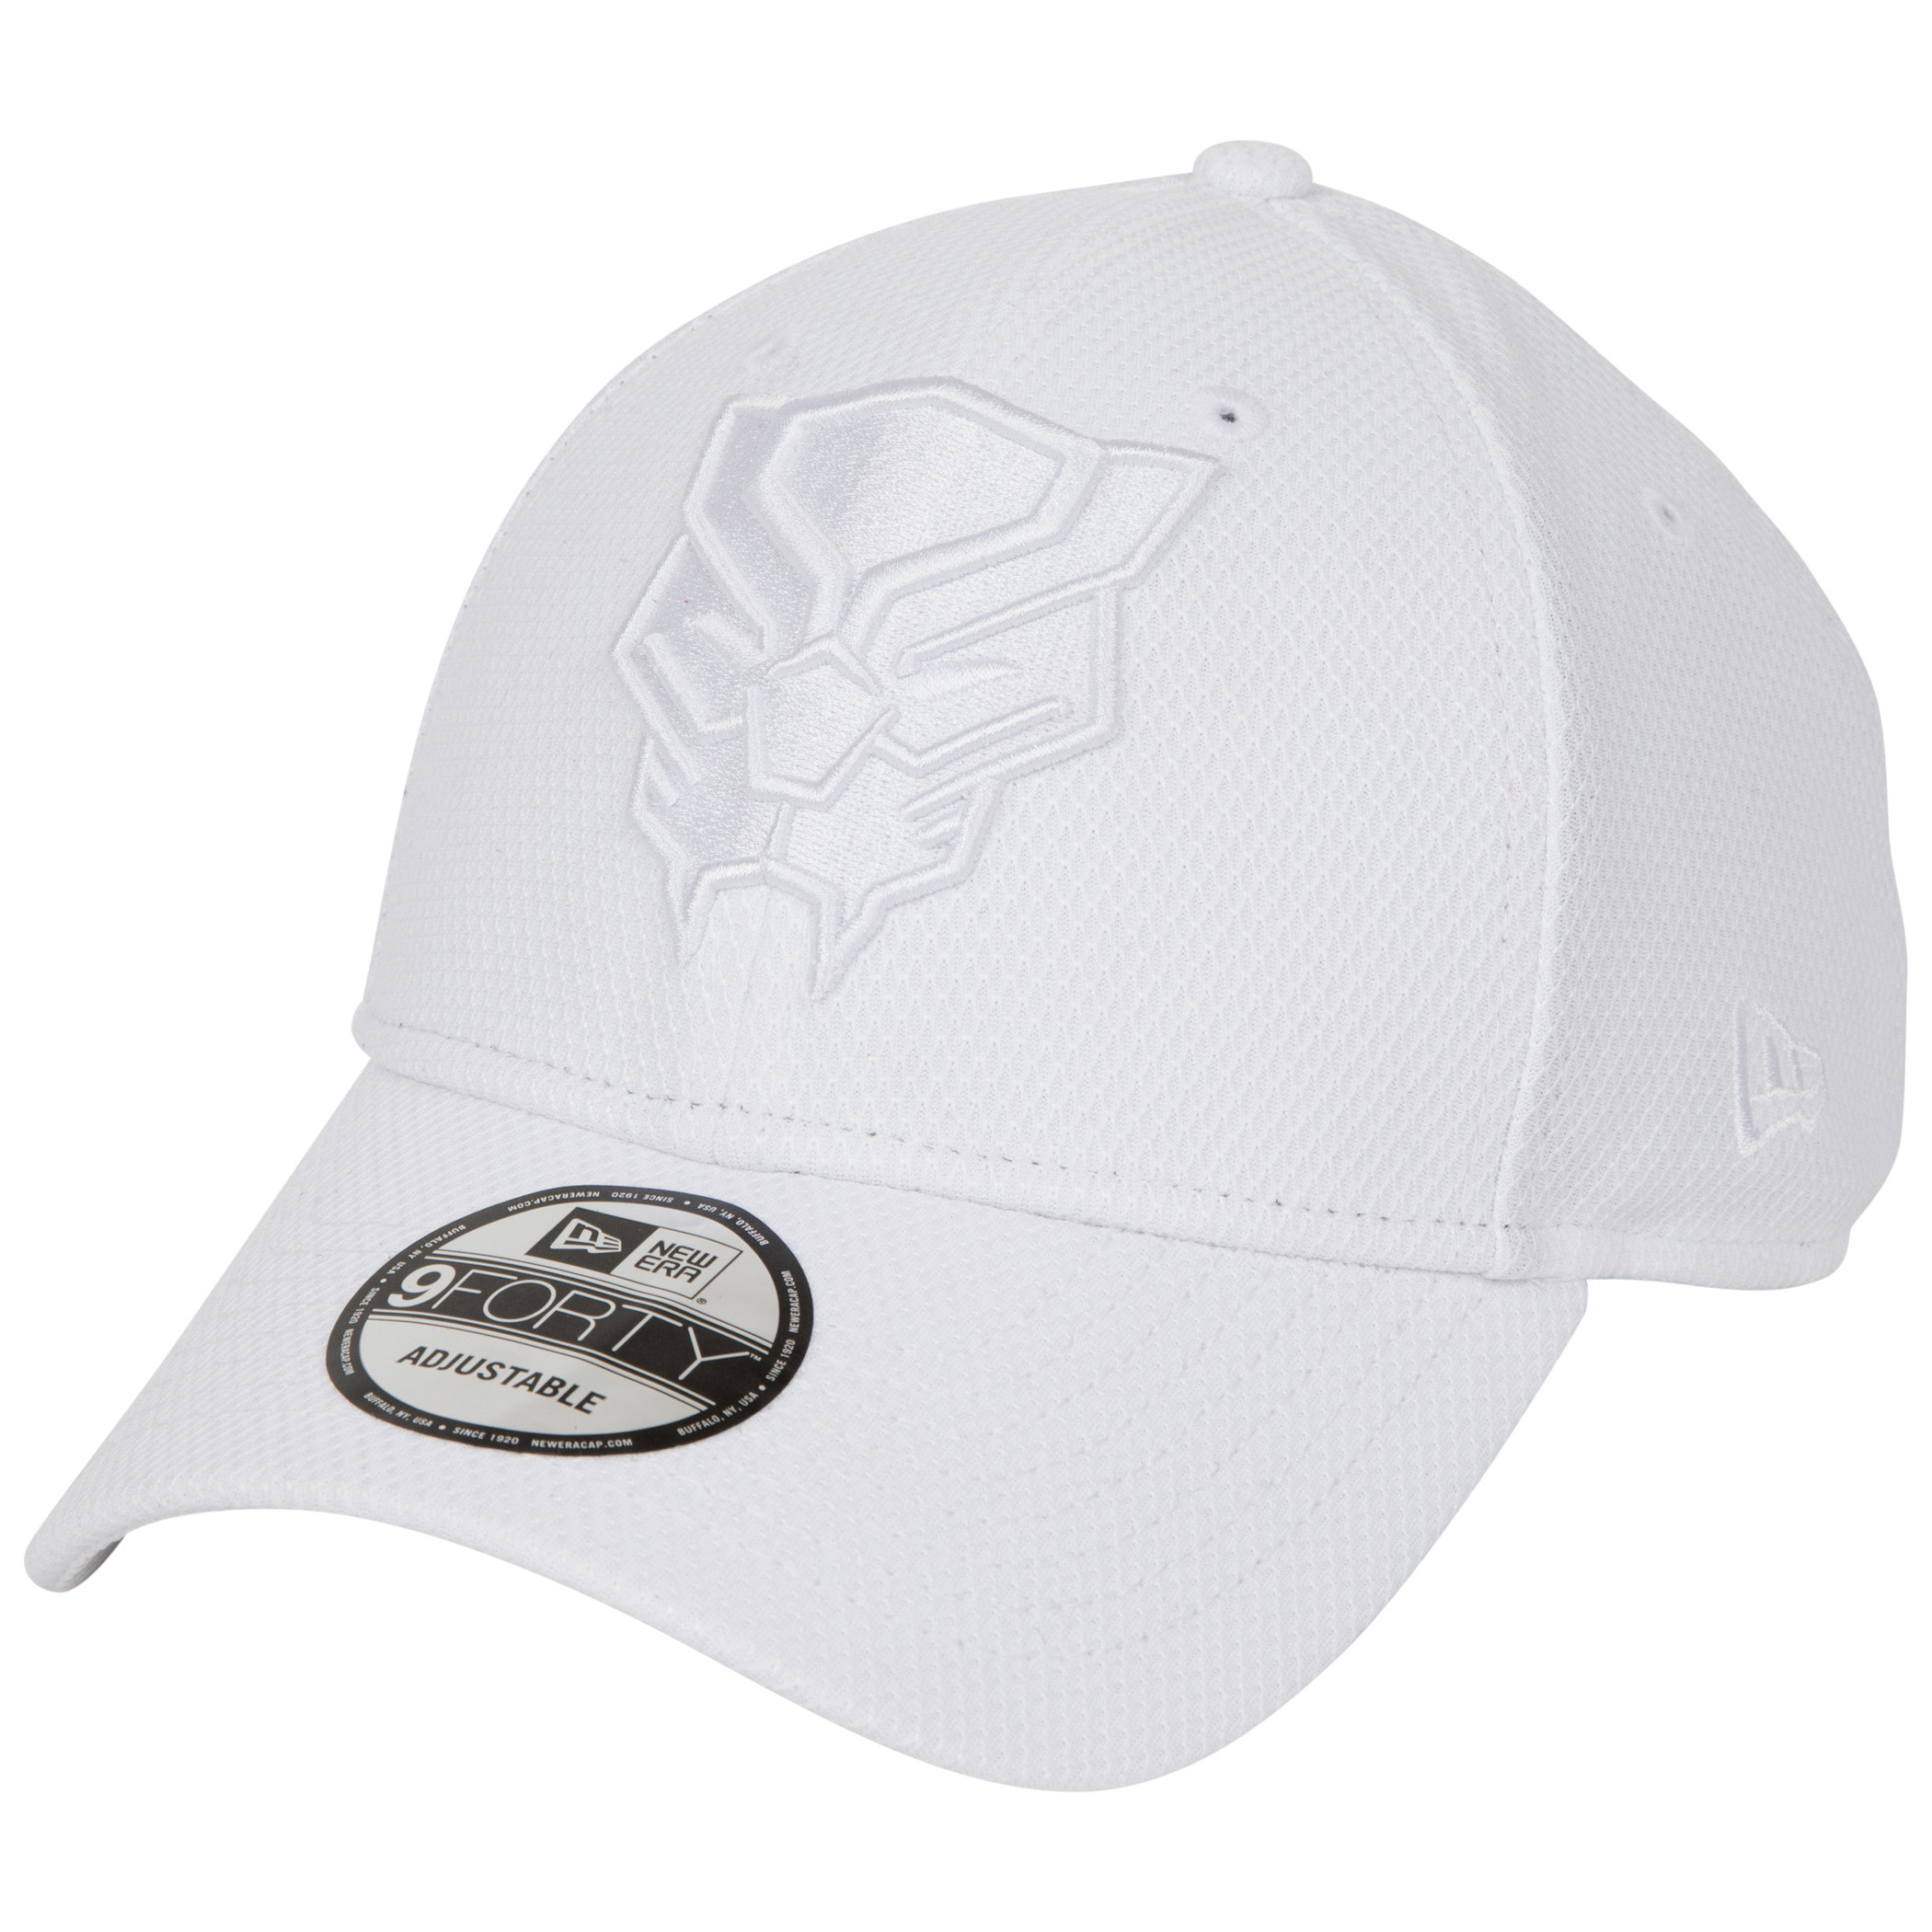 Black Panther White on White New Era 9Forty Adjustable Hat